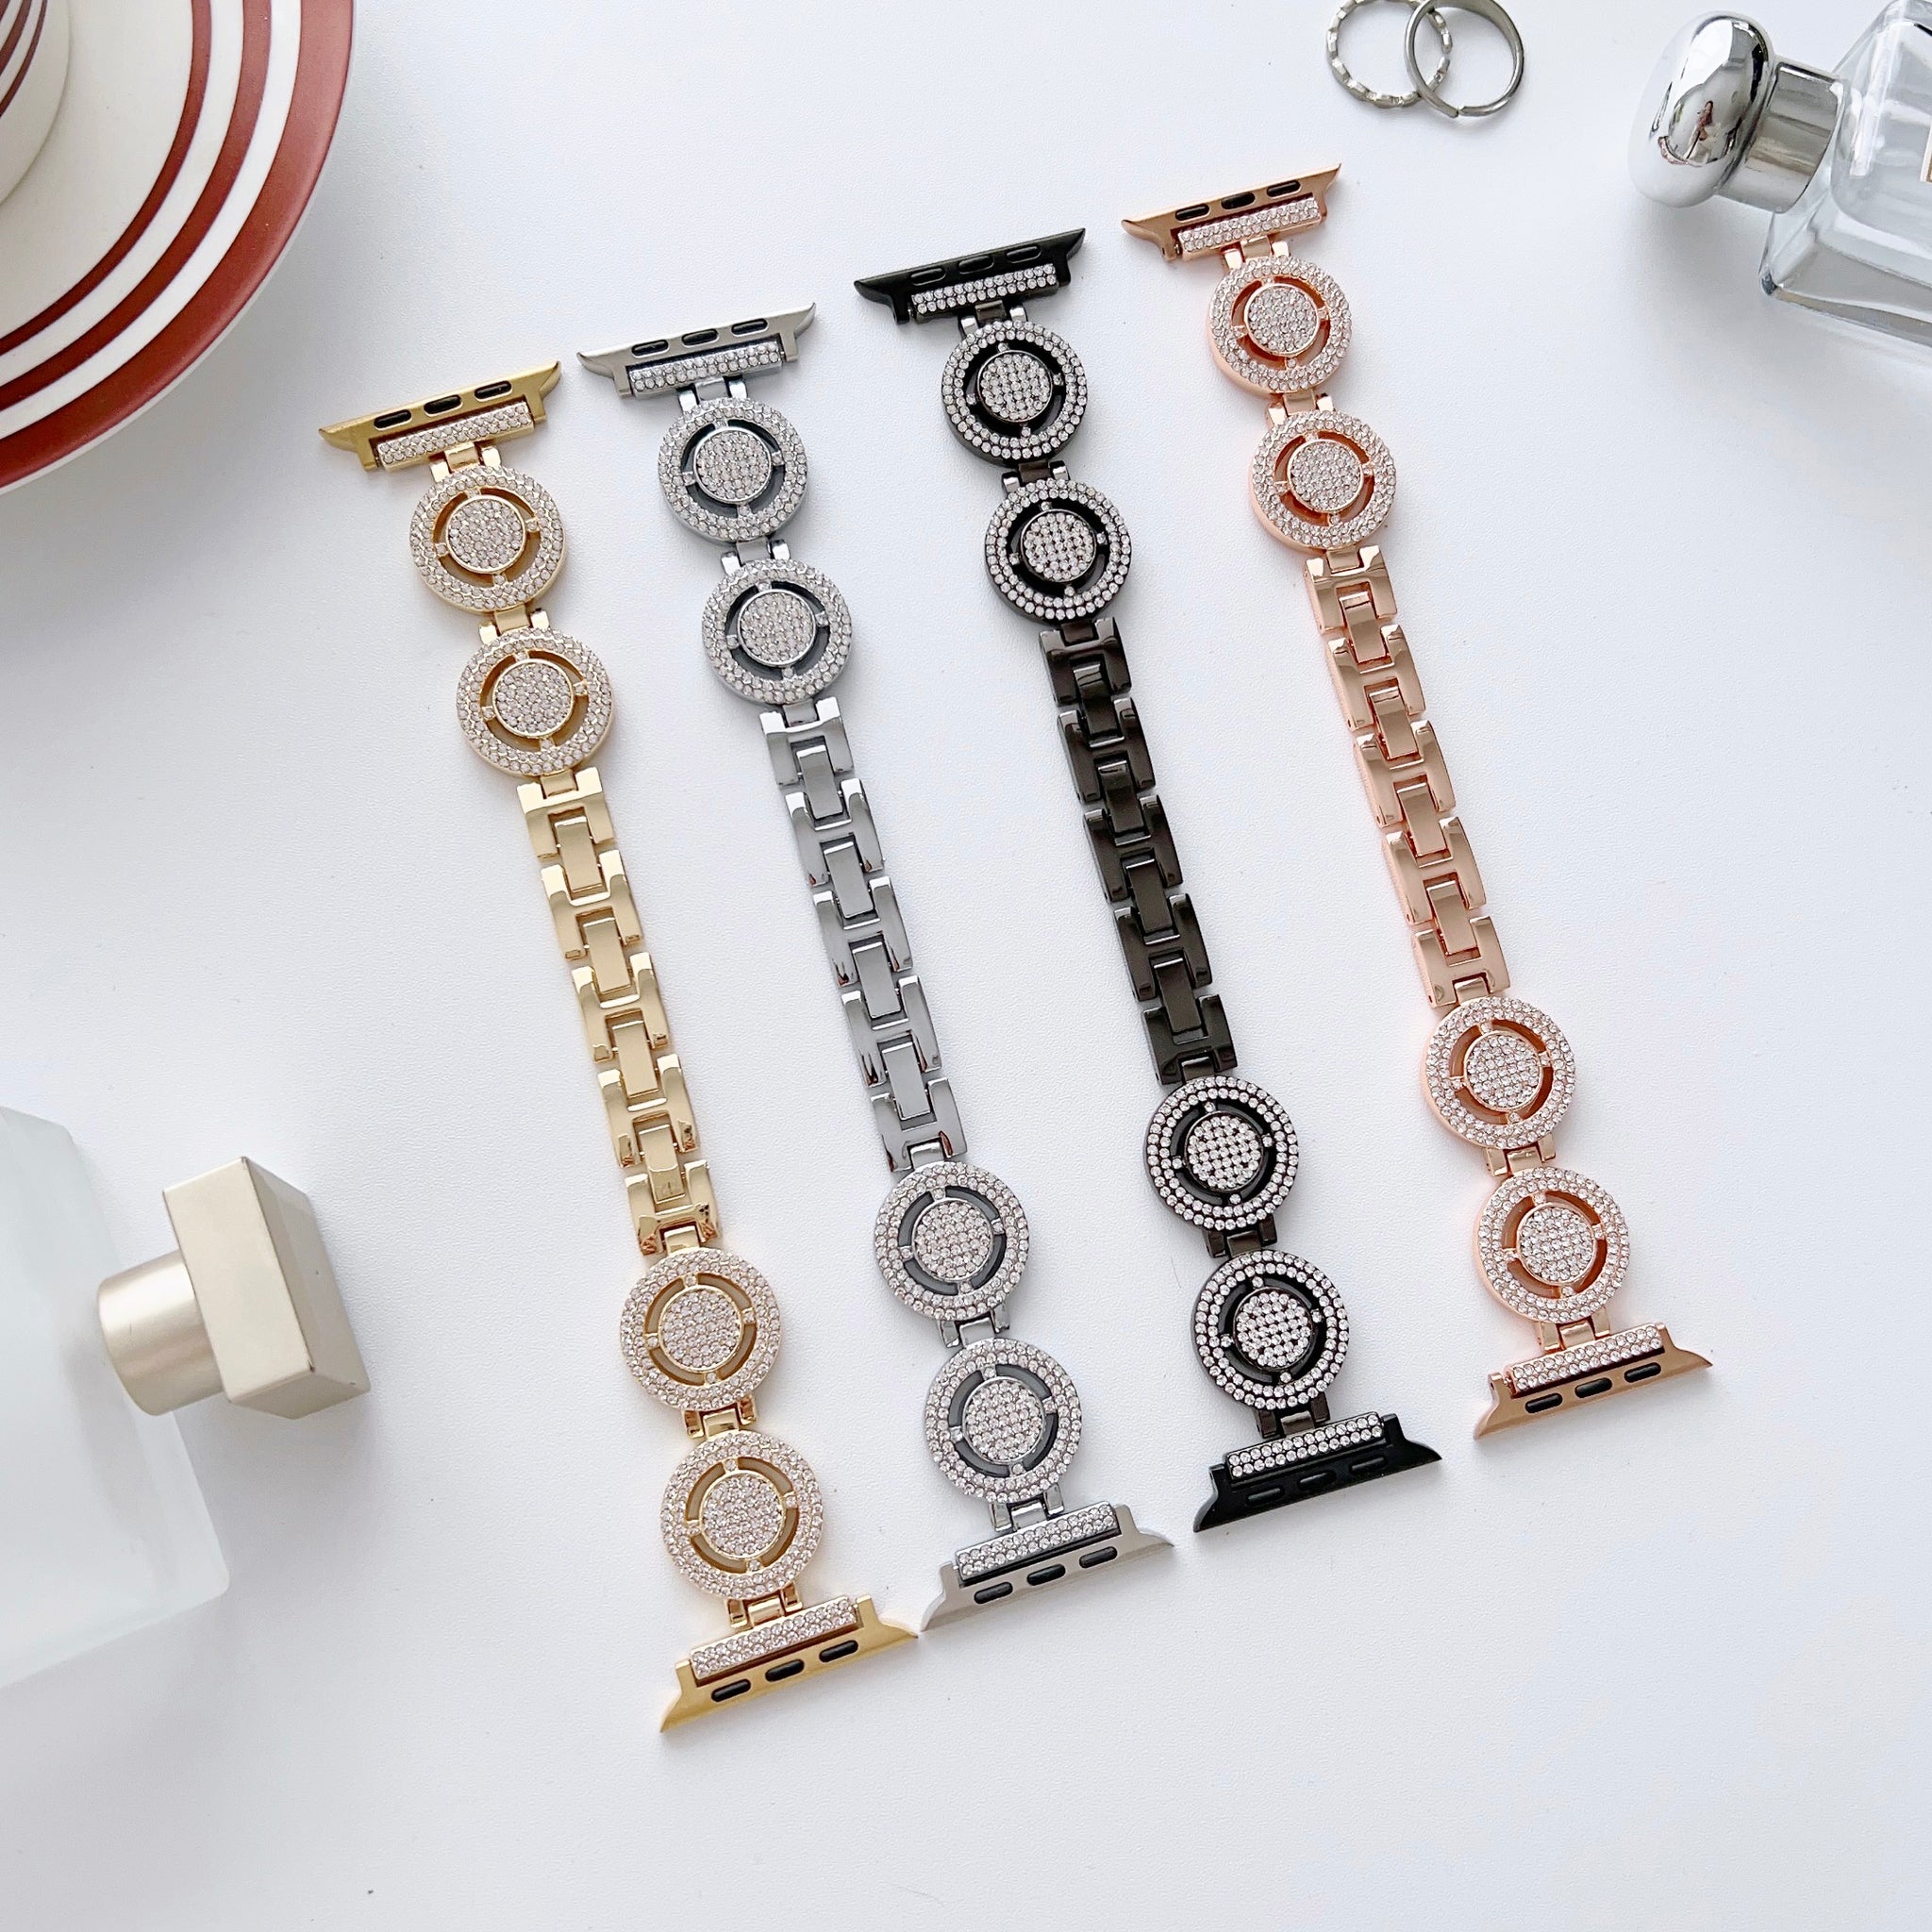 Luxury Rhinestone Halo Style Adjustable Bracelet Apple Watch Bands for iWatch All Series